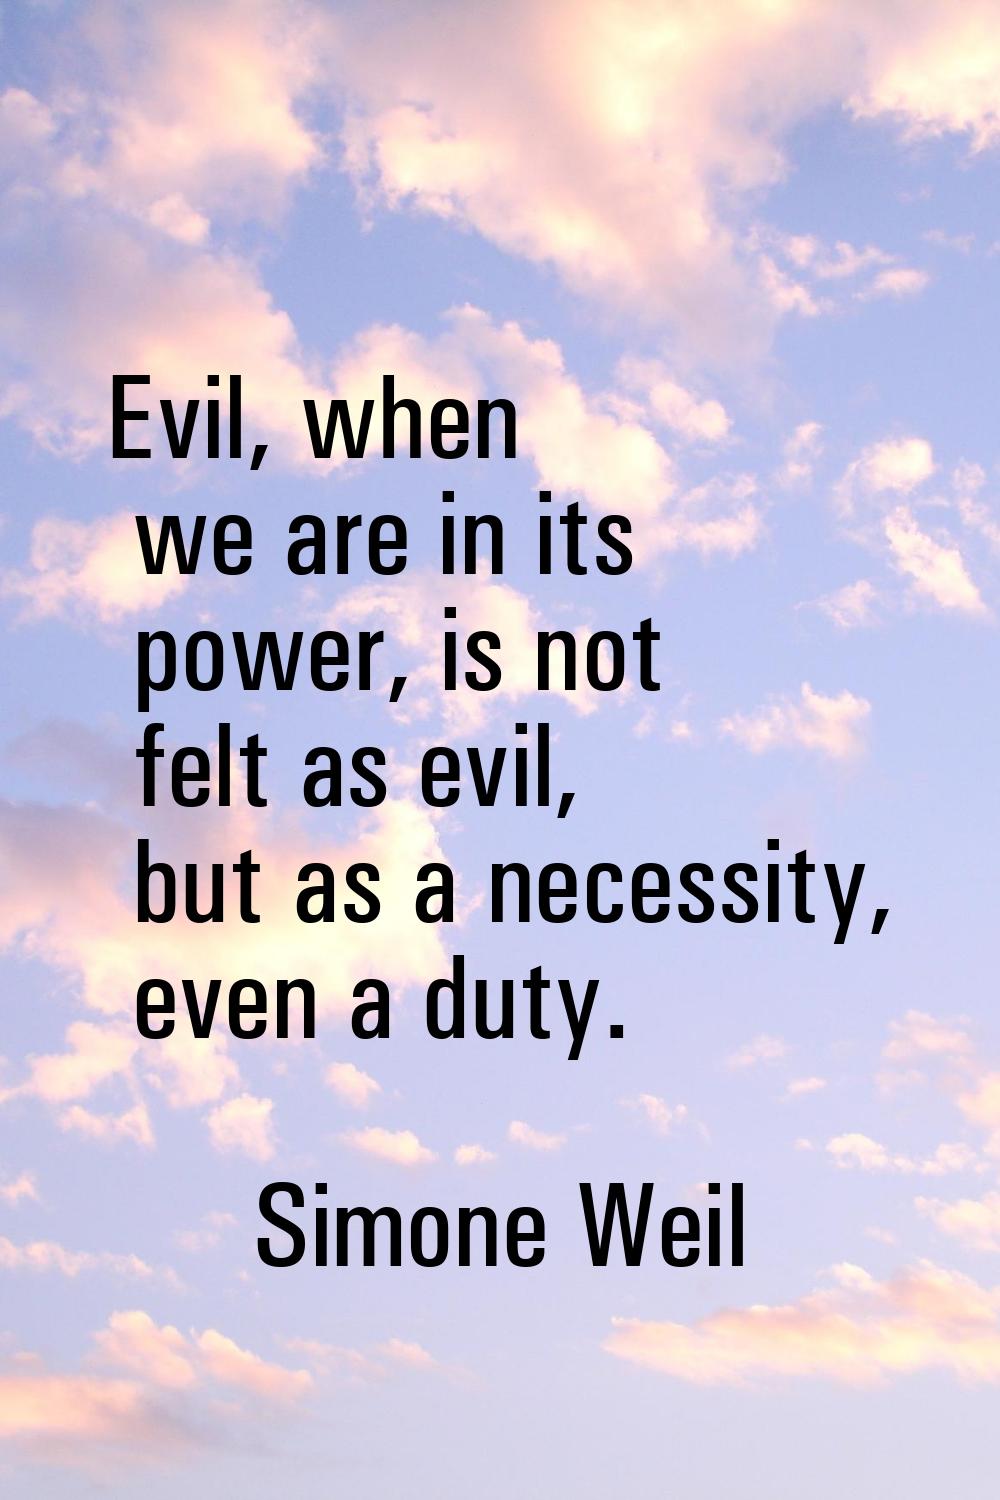 Evil, when we are in its power, is not felt as evil, but as a necessity, even a duty.